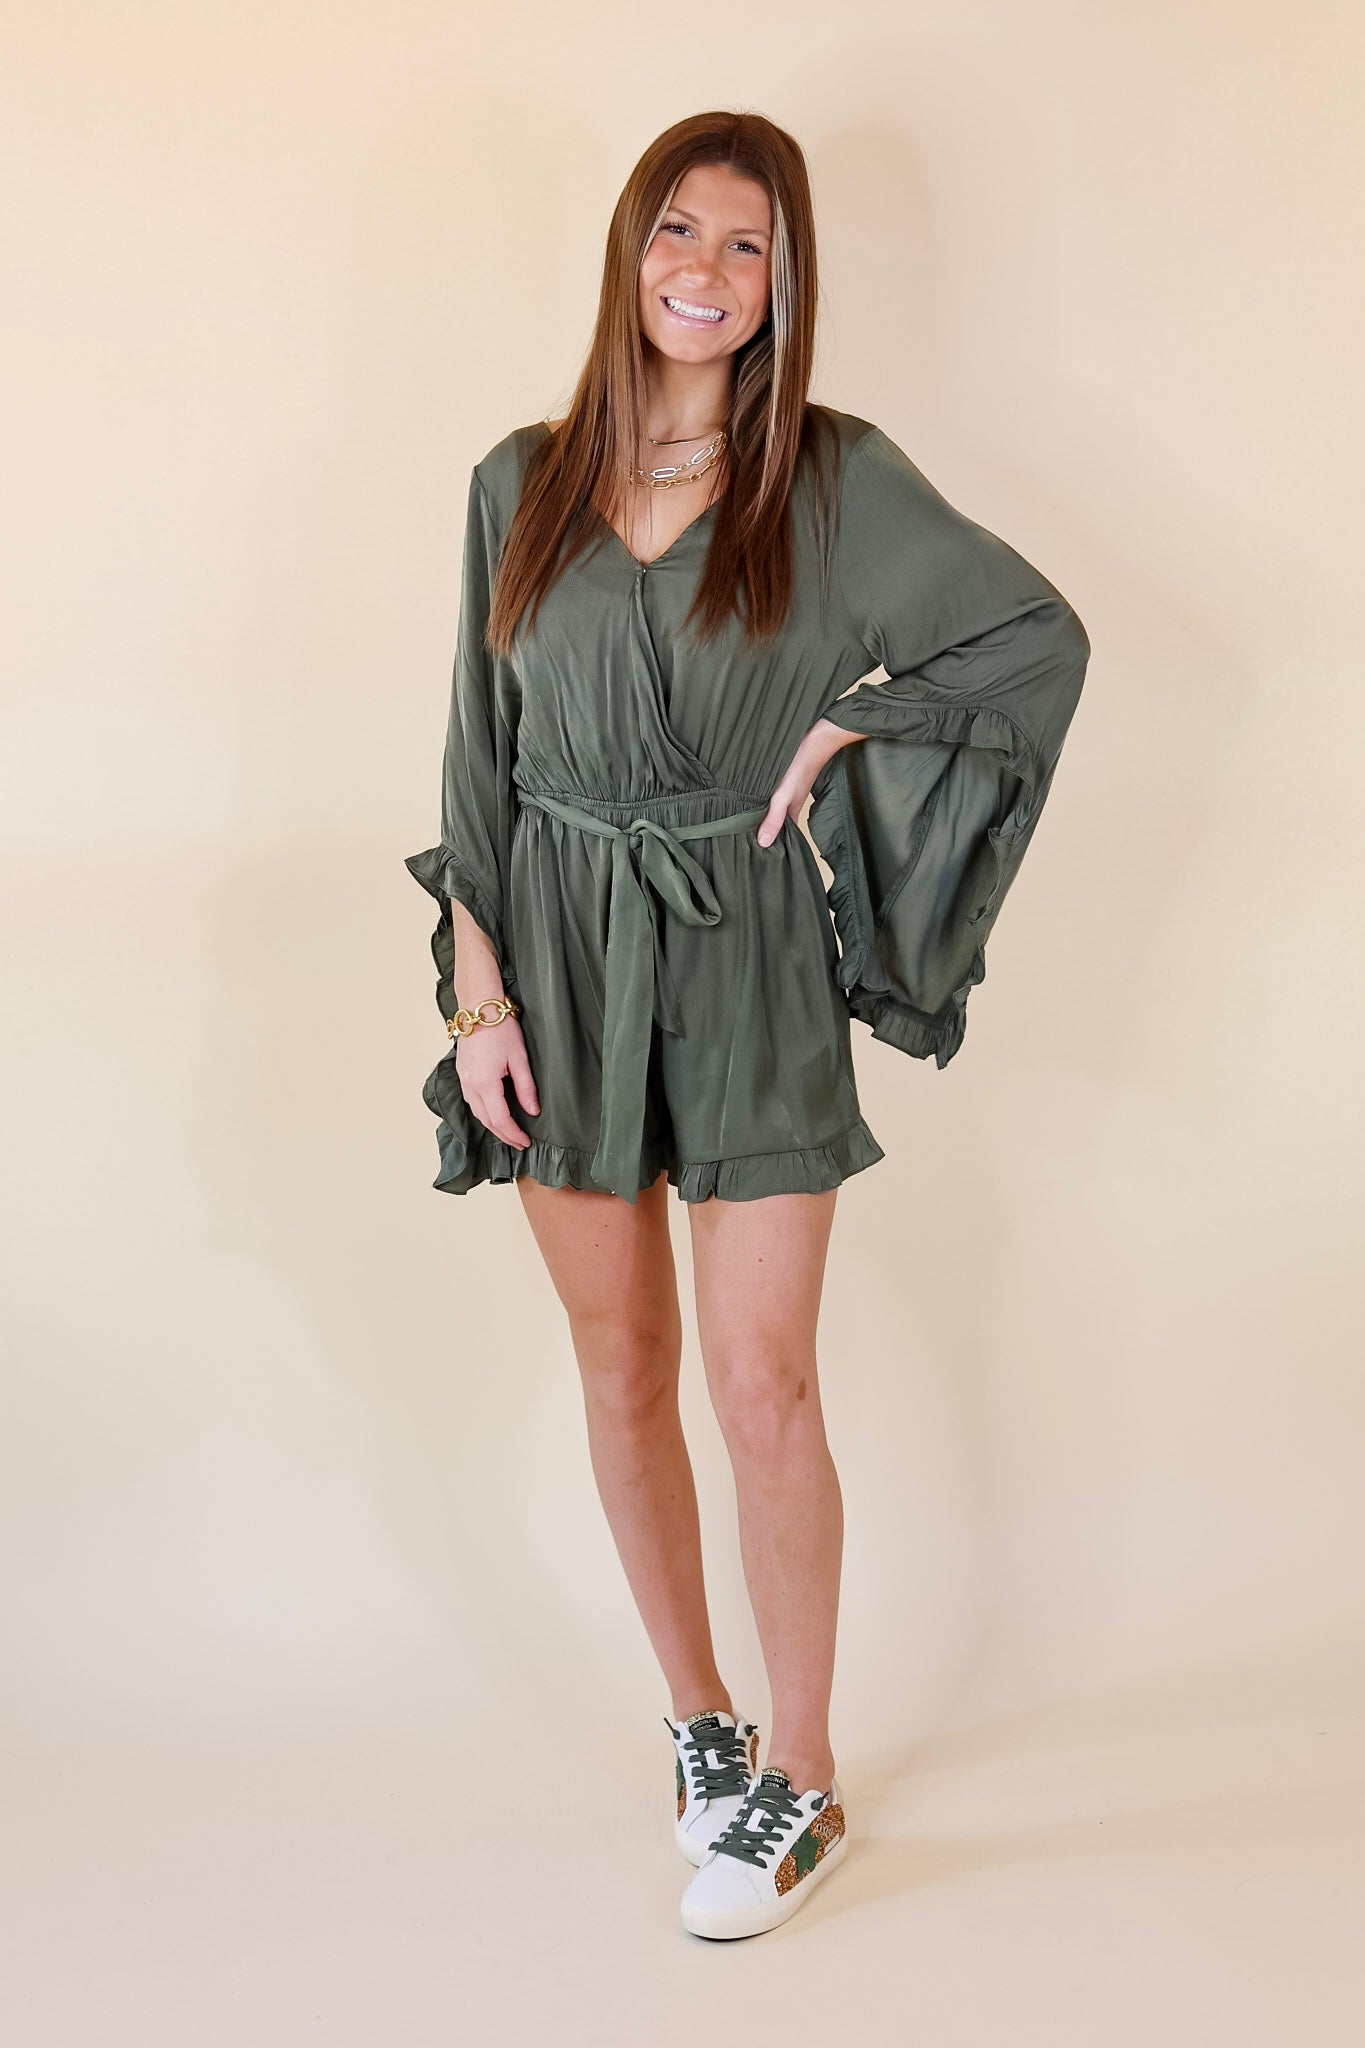 Something More Ruffle Trim Long Sleeve Satin Romper in Olive Green - Giddy Up Glamour Boutique